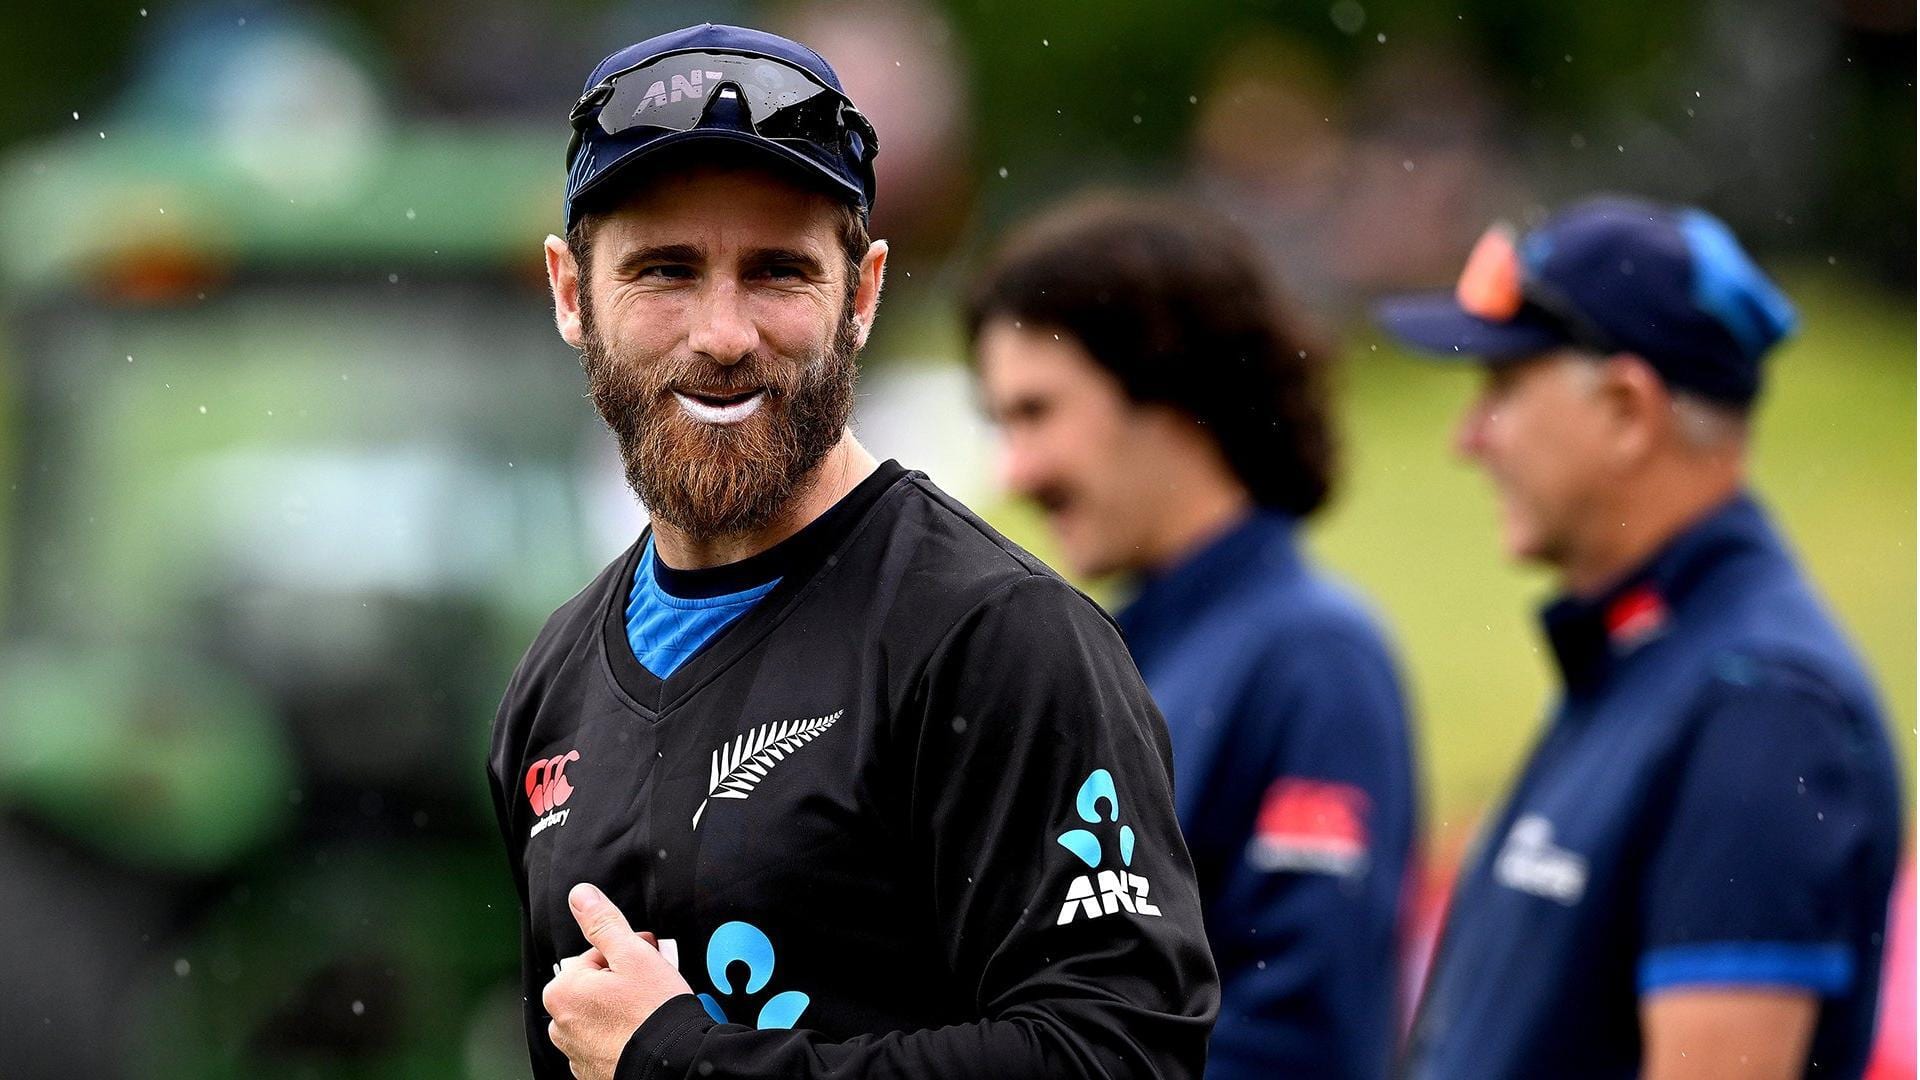 ICC World Cup: Kane Williamson set to lead New Zealand